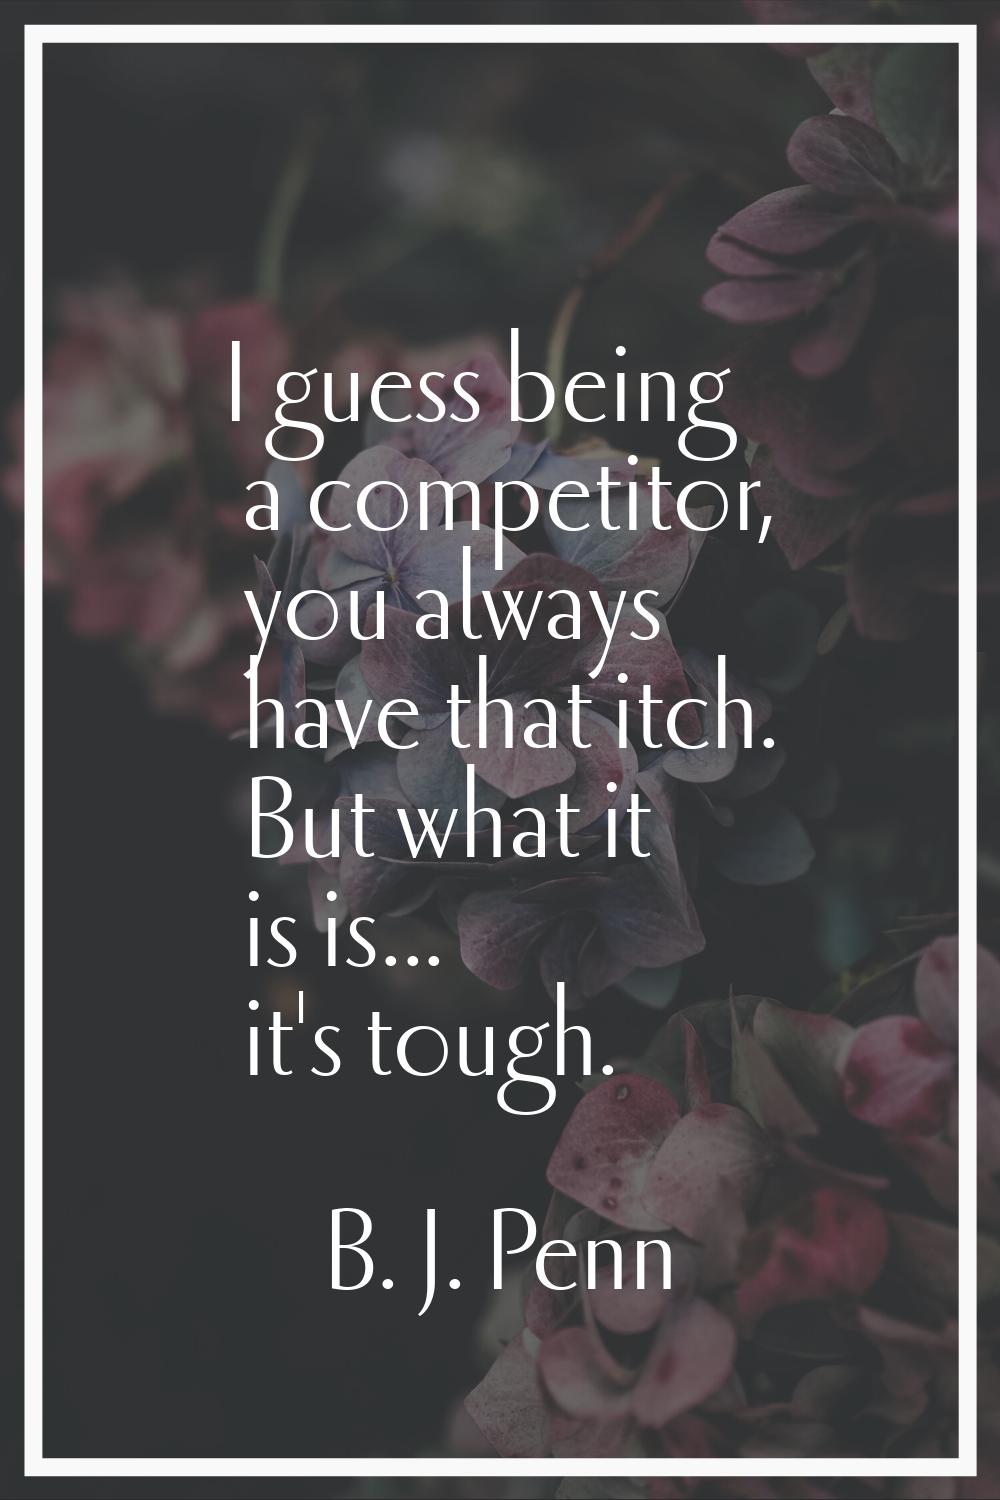 I guess being a competitor, you always have that itch. But what it is is... it's tough.